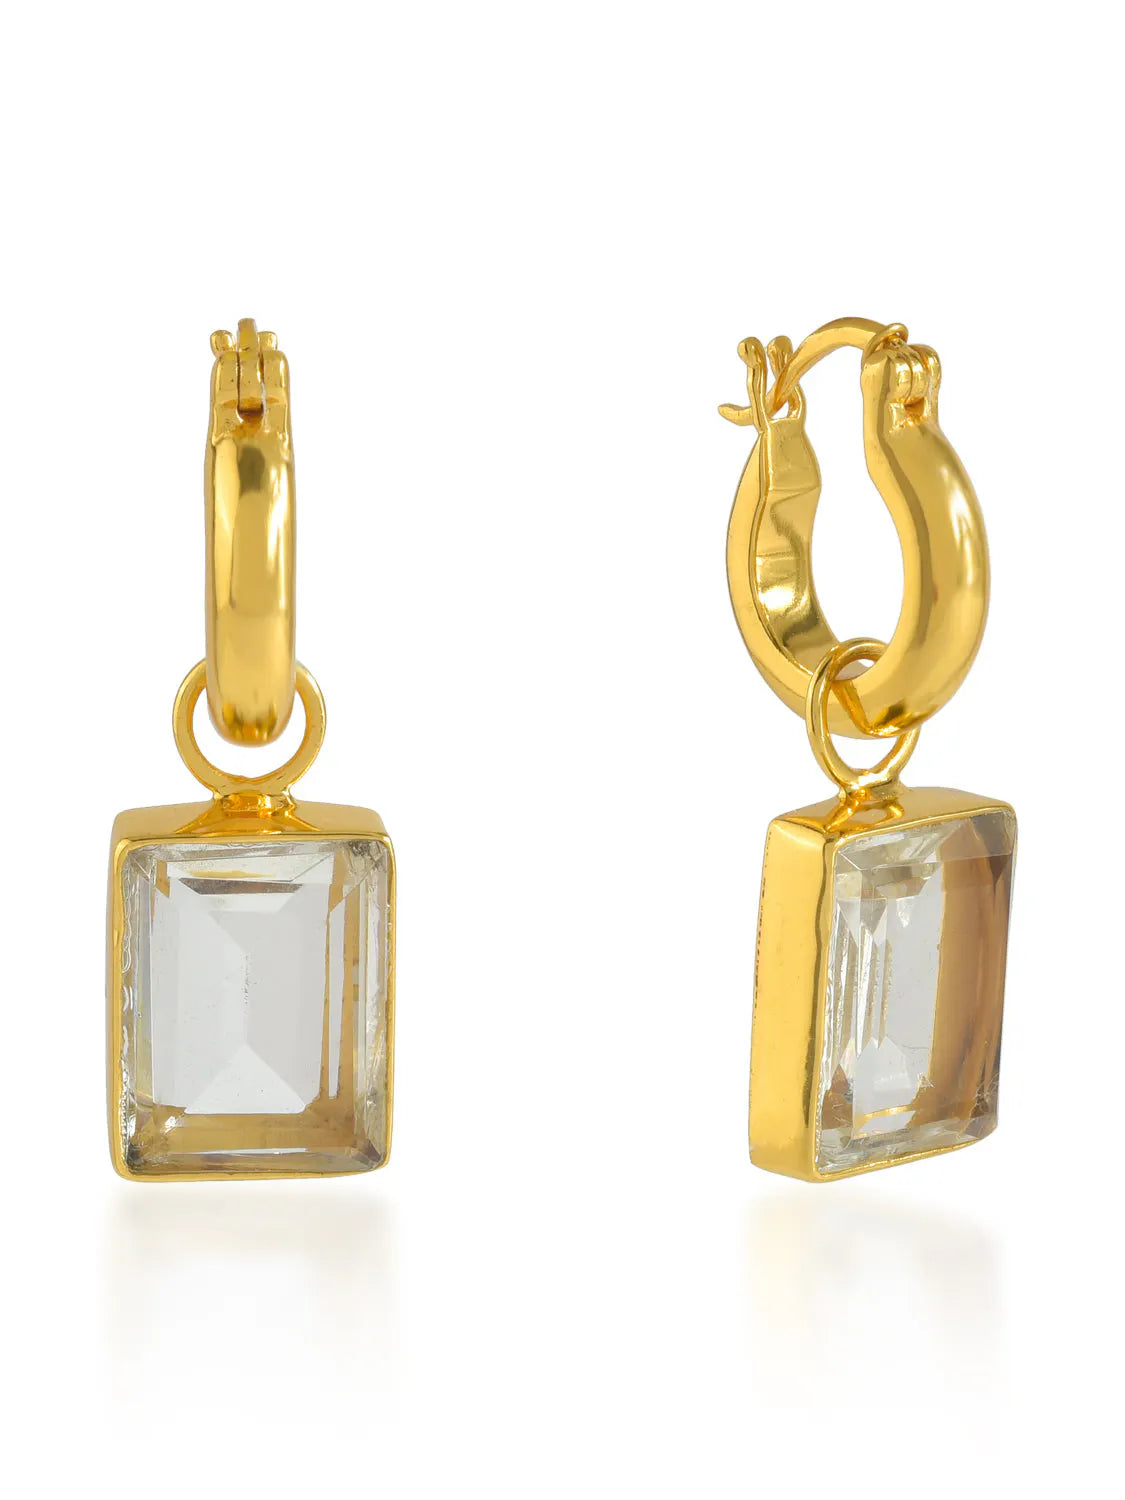 A pair of Shyla - Sorrento Hoops- Gold hoop earrings with a clear cubic zirconia.